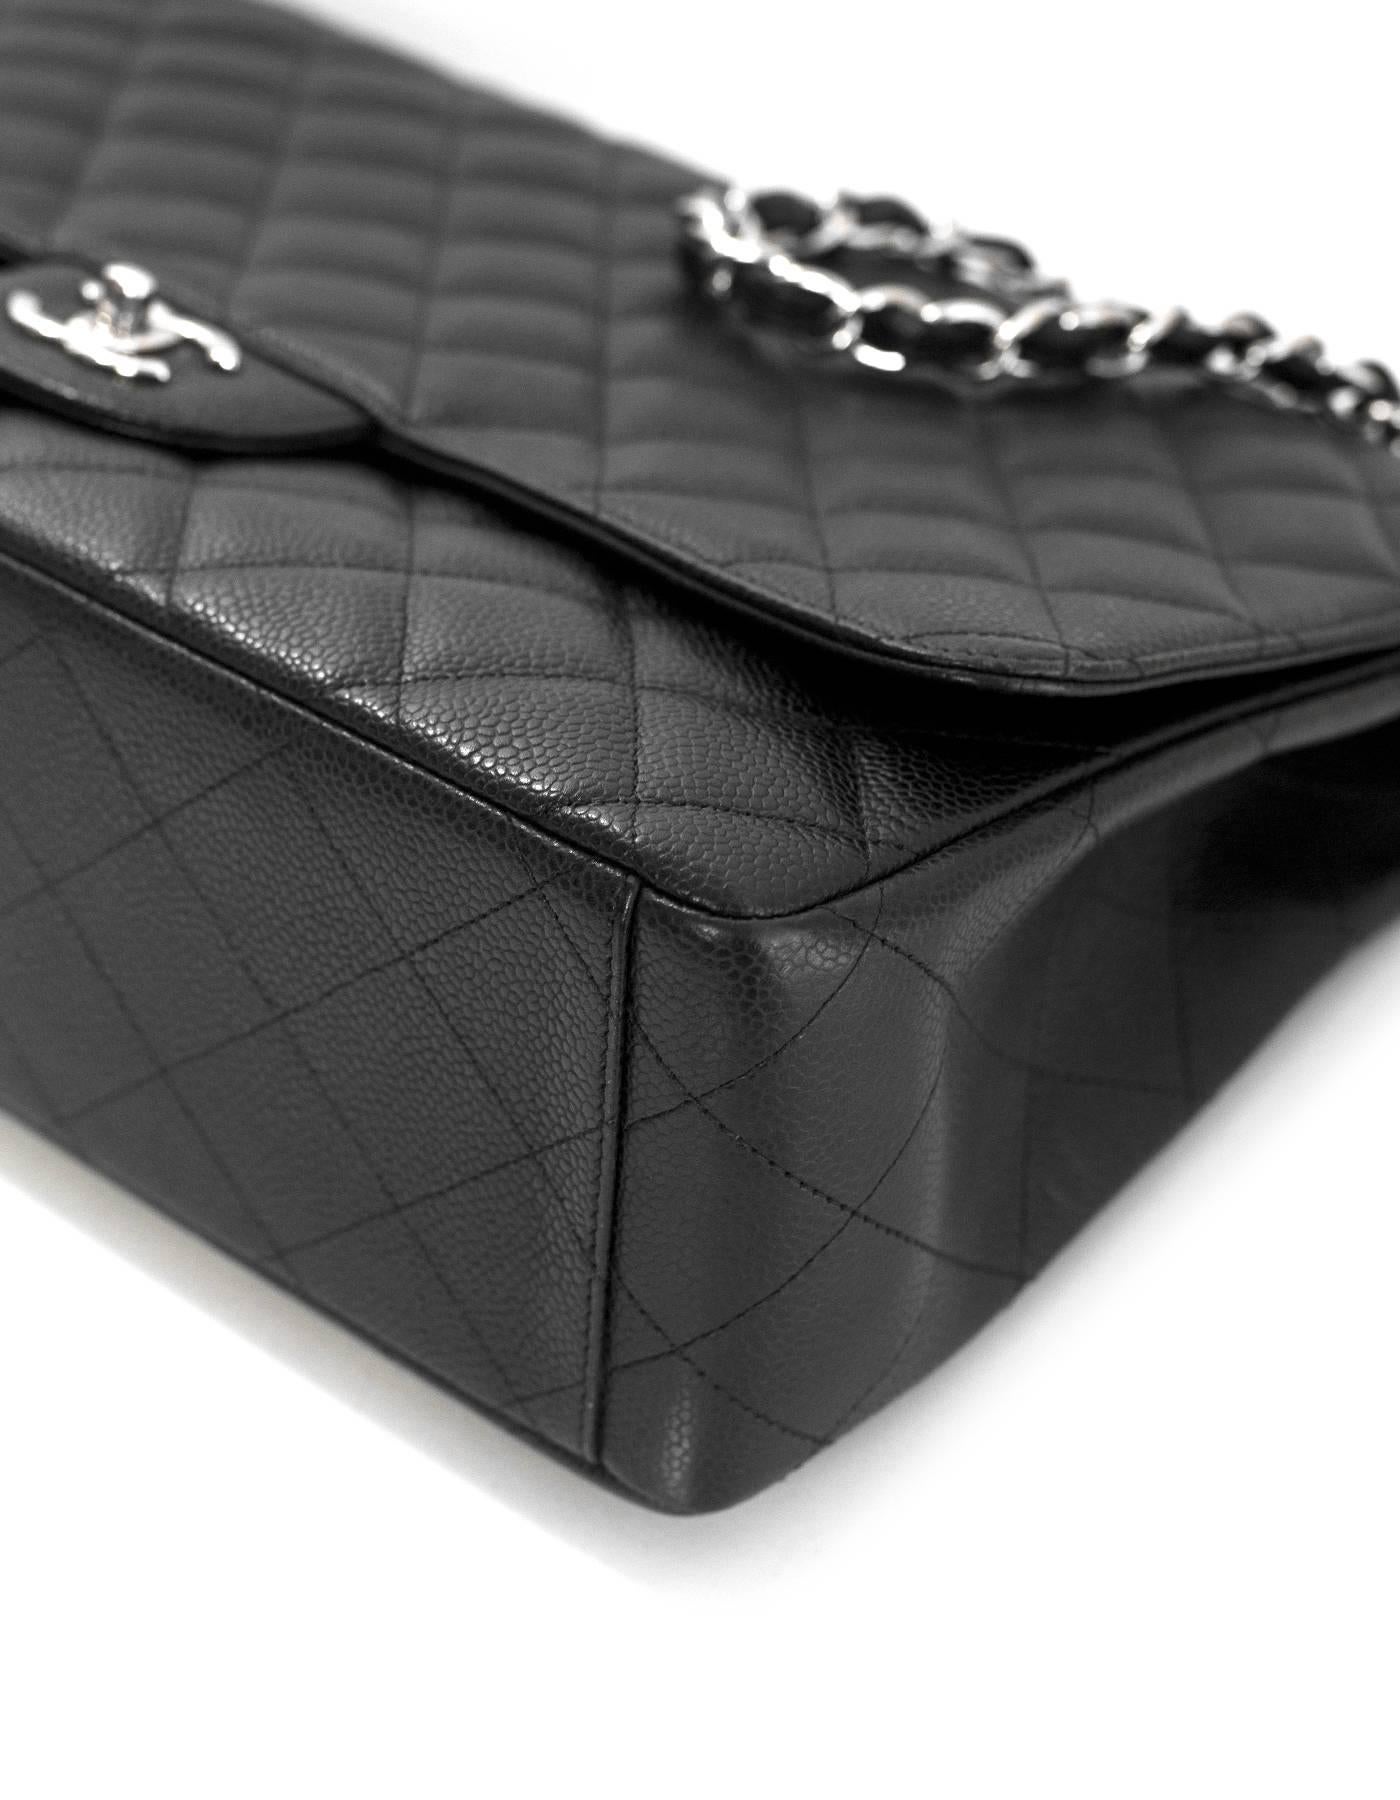 Women's Chanel Black Caviar Leather Quilted Single Flap Maxi Classic Bag with DB